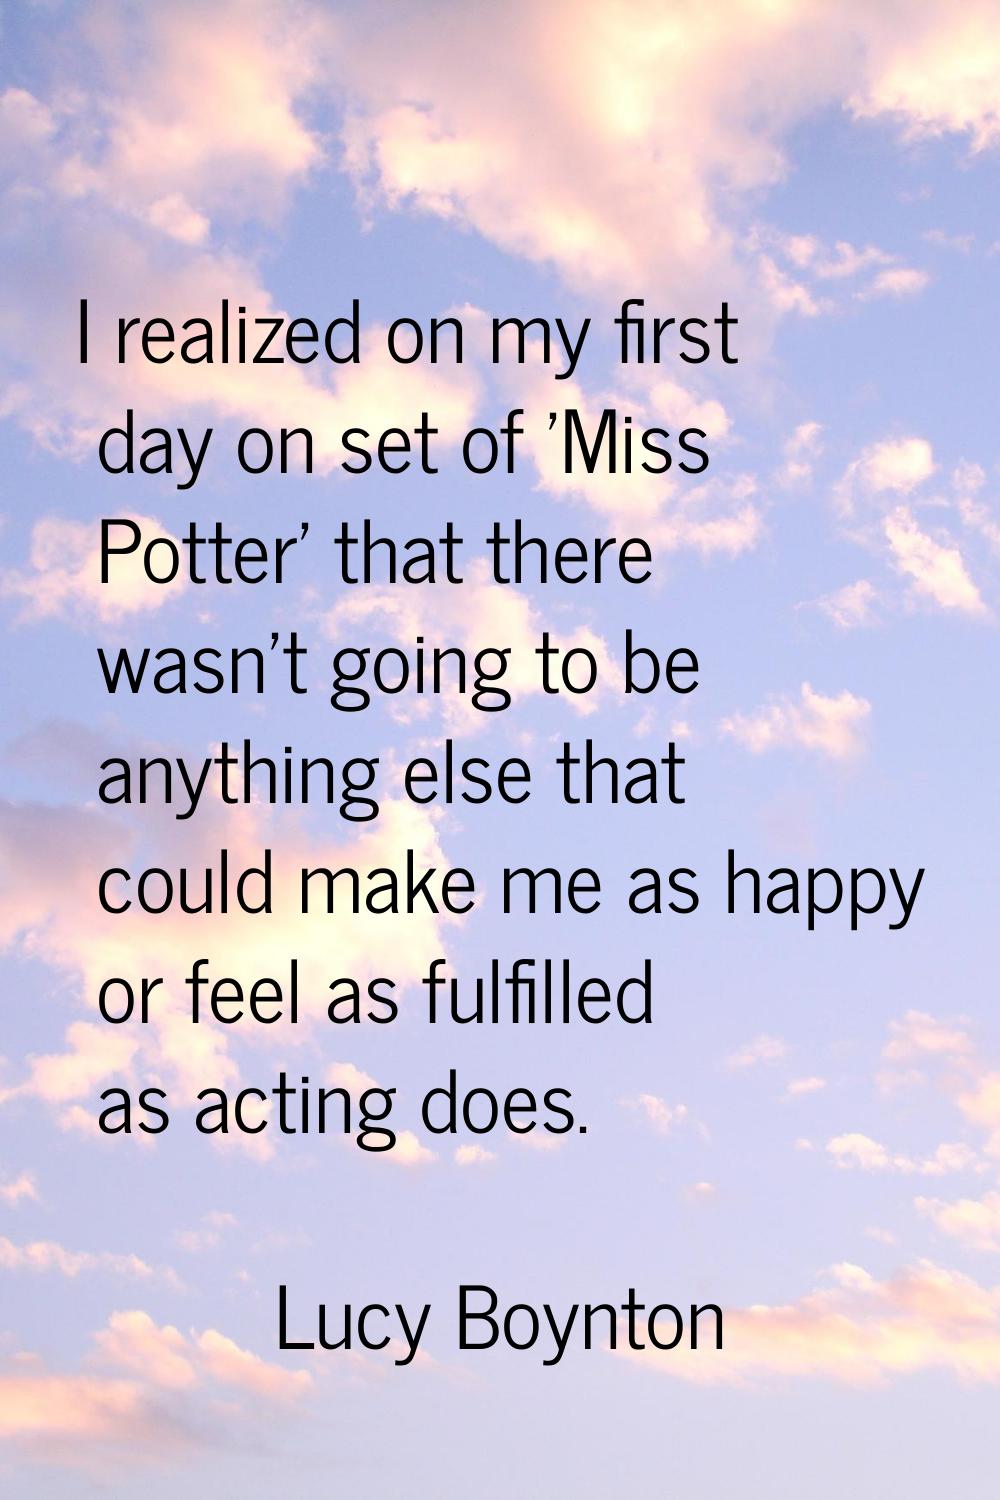 I realized on my first day on set of 'Miss Potter' that there wasn't going to be anything else that